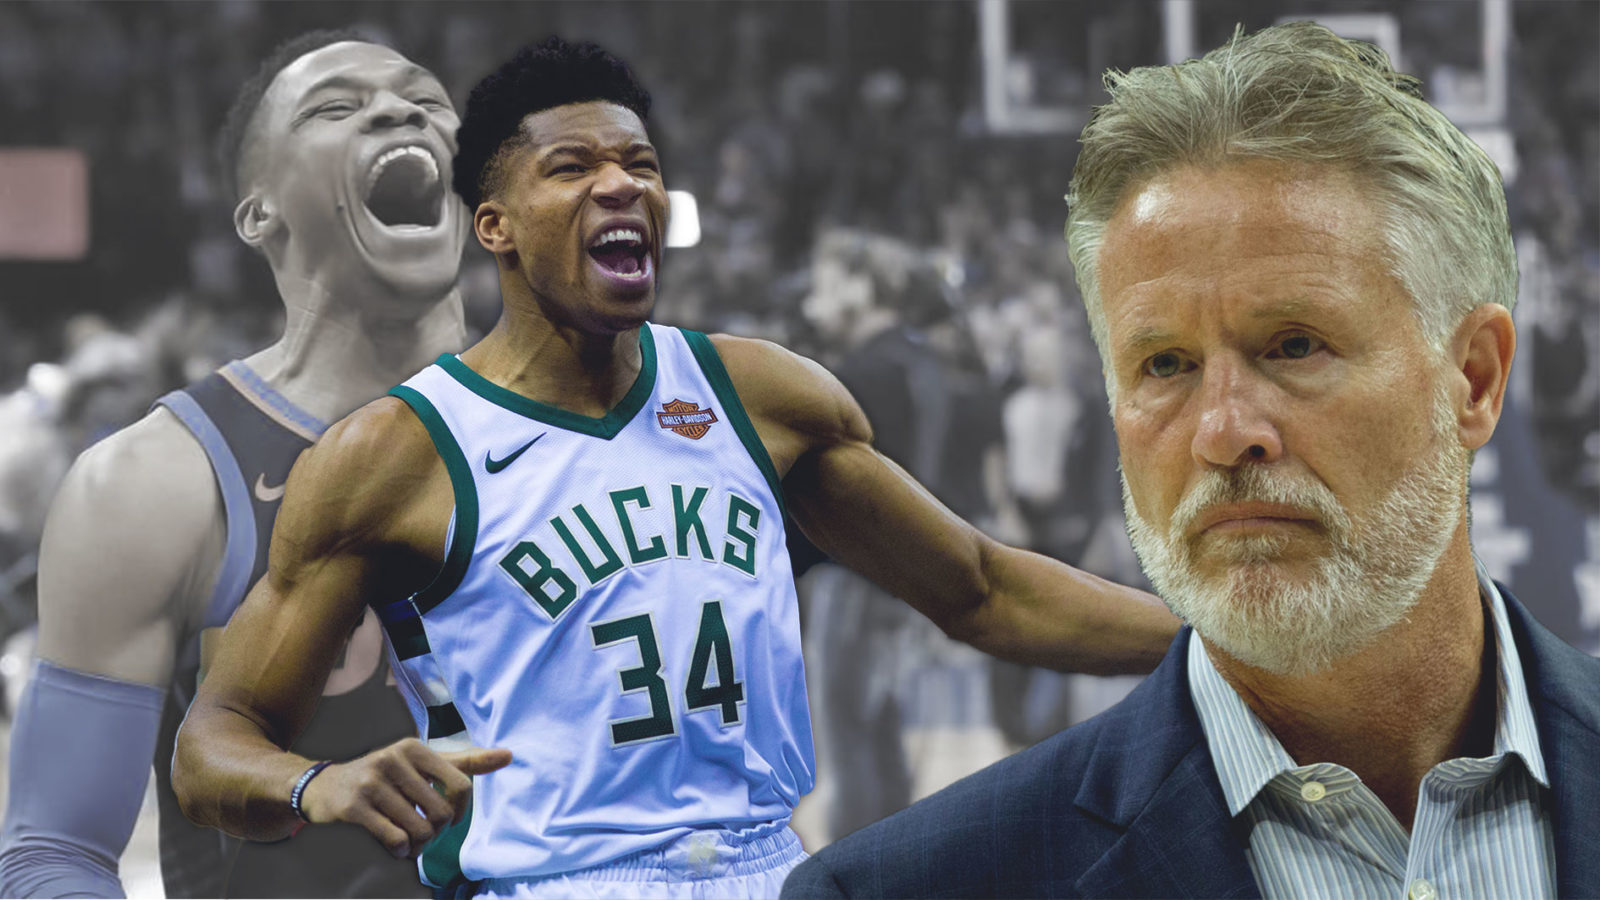 Brett-Brown-says-Giannis-Antetokounmpo-plays-with-_Russell-Westbrook-like-disposition_-e1520194592363